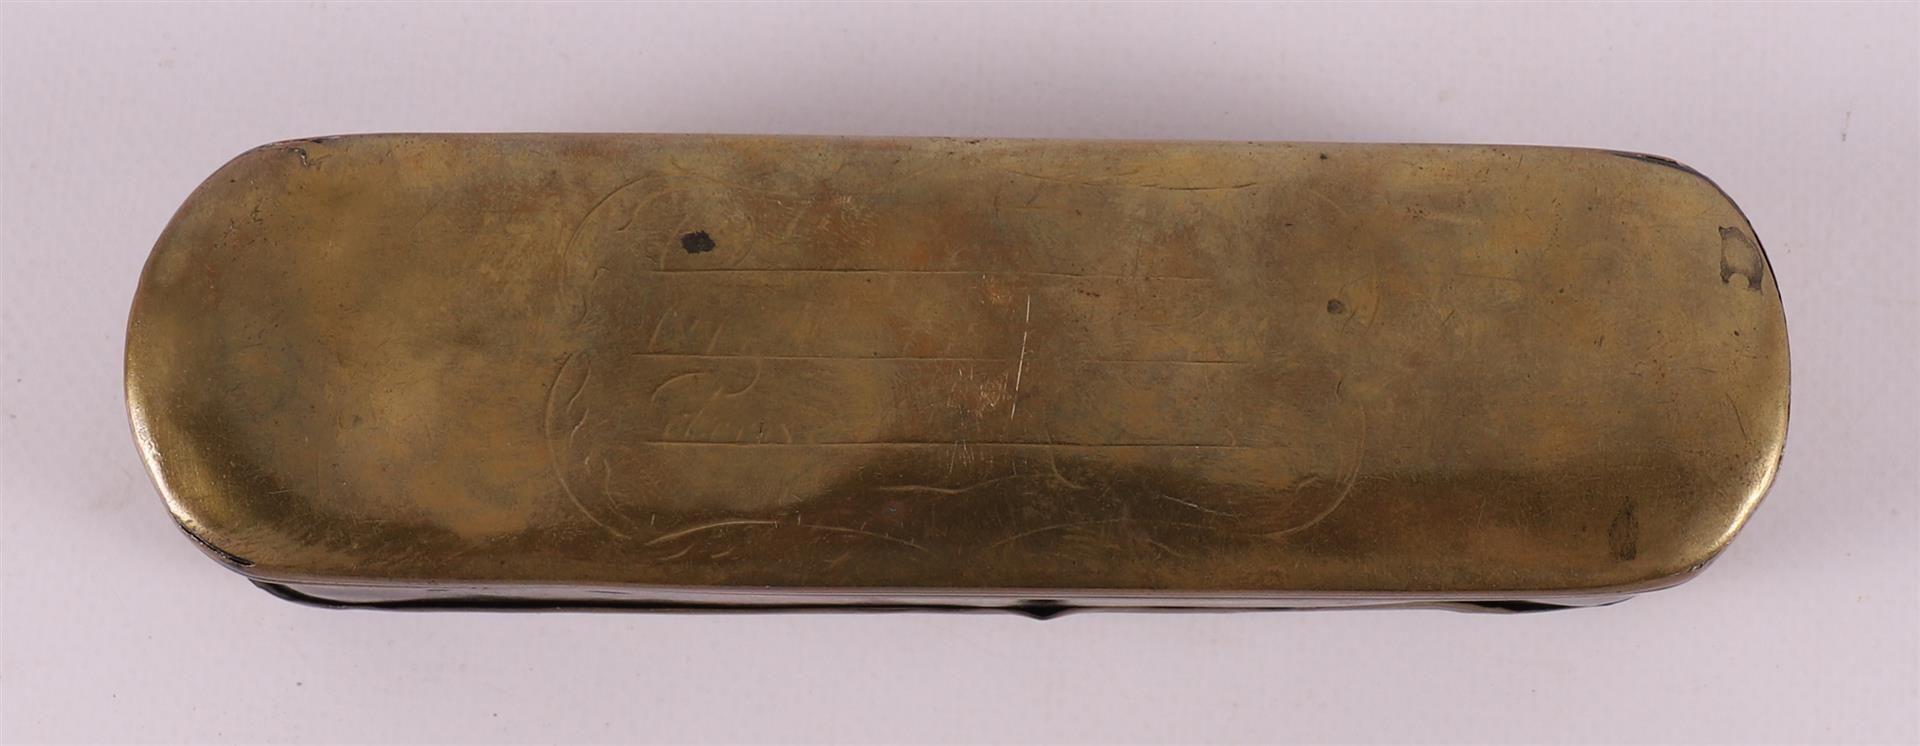 Two various brass tobacco boxes, 18th century. - Image 8 of 9